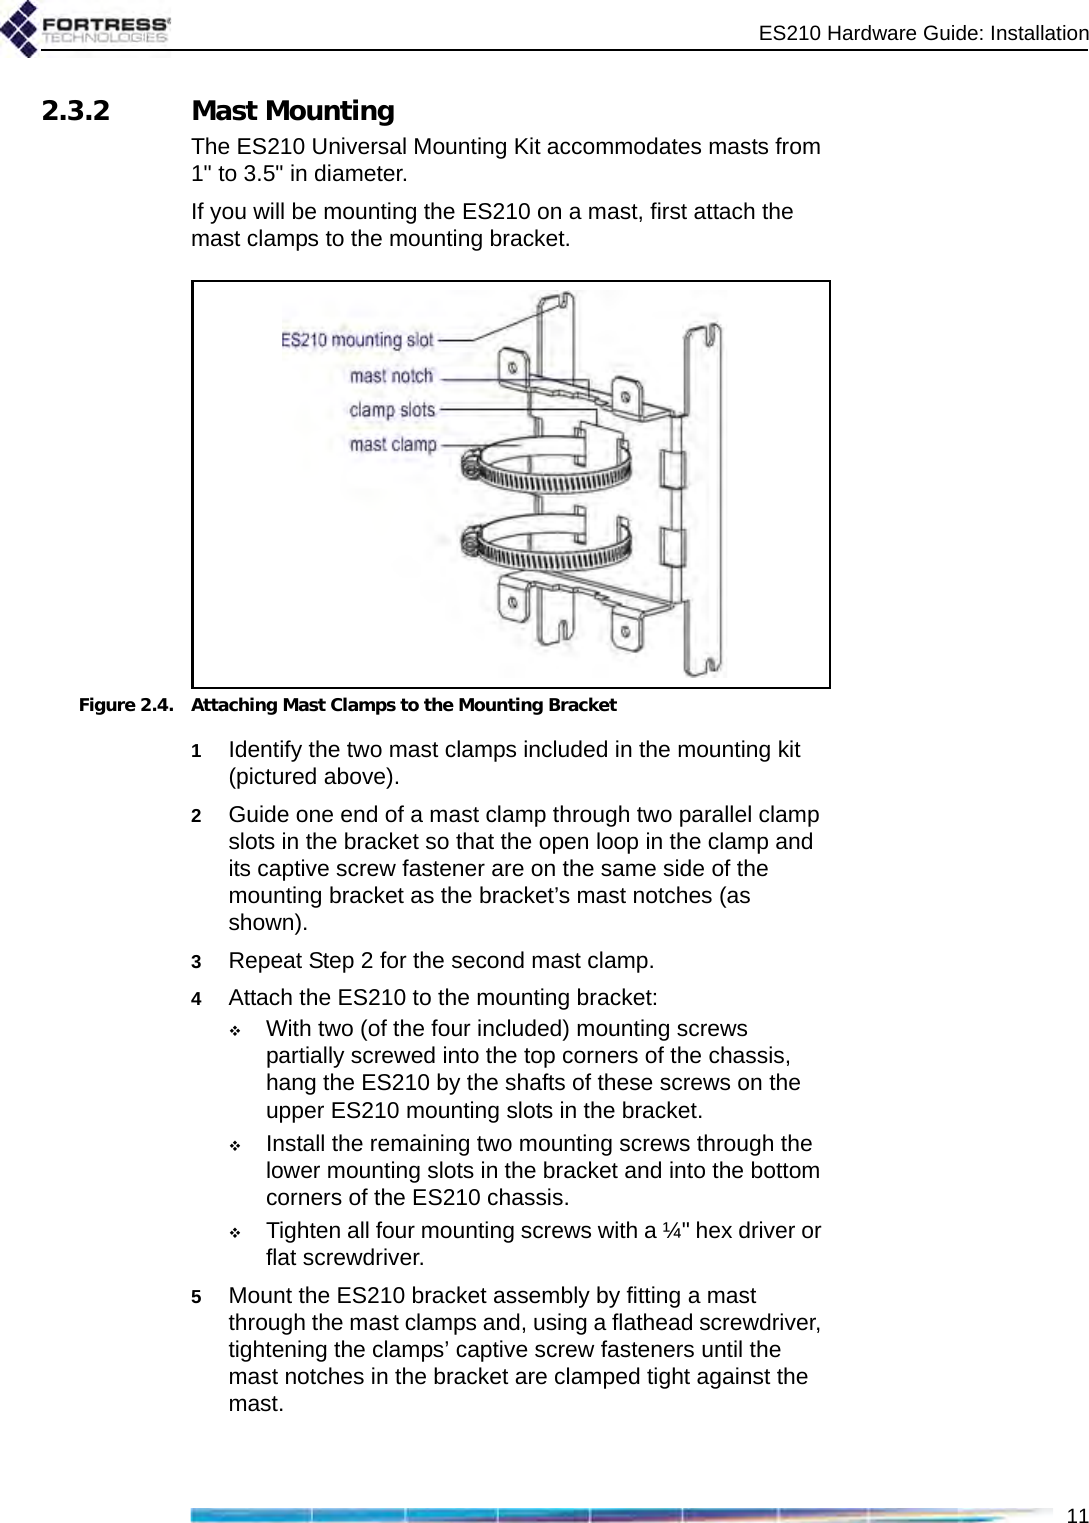 ES210 Hardware Guide: Installation112.3.2 Mast MountingThe ES210 Universal Mounting Kit accommodates masts from 1&quot; to 3.5&quot; in diameter.If you will be mounting the ES210 on a mast, first attach the mast clamps to the mounting bracket.Figure 2.4. Attaching Mast Clamps to the Mounting Bracket1Identify the two mast clamps included in the mounting kit (pictured above).2Guide one end of a mast clamp through two parallel clamp slots in the bracket so that the open loop in the clamp and its captive screw fastener are on the same side of the mounting bracket as the bracket’s mast notches (as shown).3Repeat Step 2 for the second mast clamp.4Attach the ES210 to the mounting bracket: With two (of the four included) mounting screws partially screwed into the top corners of the chassis, hang the ES210 by the shafts of these screws on the upper ES210 mounting slots in the bracket.Install the remaining two mounting screws through the lower mounting slots in the bracket and into the bottom corners of the ES210 chassis.Tighten all four mounting screws with a ¼&quot; hex driver or flat screwdriver.5Mount the ES210 bracket assembly by fitting a mast through the mast clamps and, using a flathead screwdriver, tightening the clamps’ captive screw fasteners until the mast notches in the bracket are clamped tight against the mast.